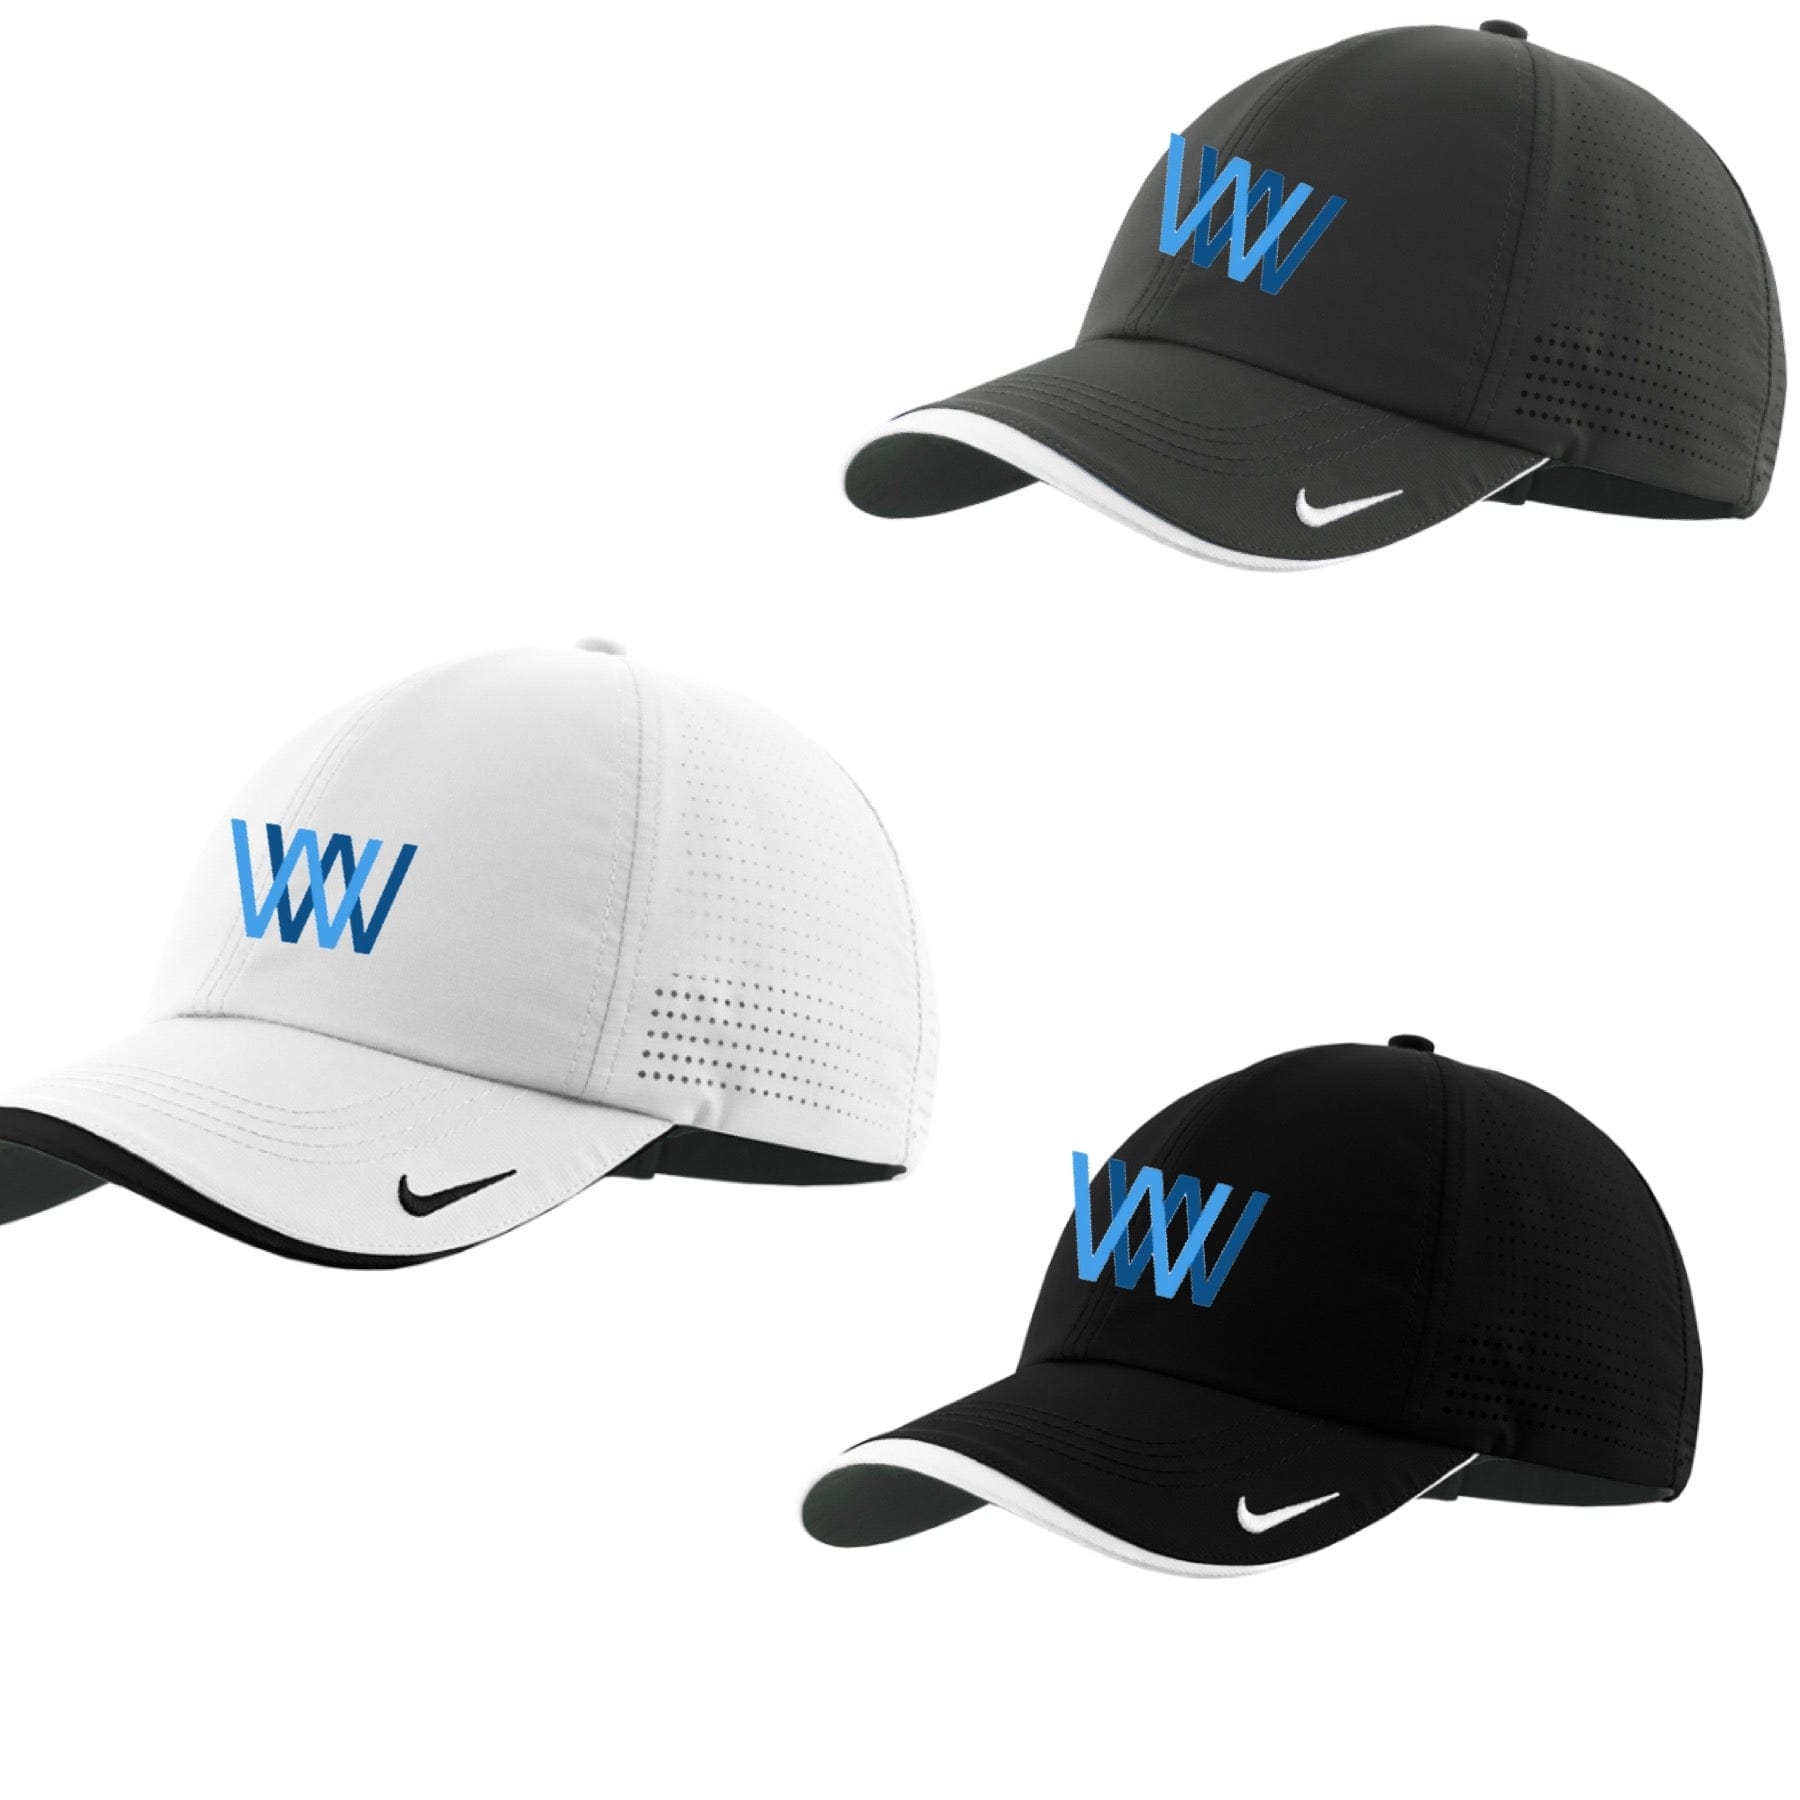 Equestrian Team Apparel Double W Farms Nike baseball cap equestrian team apparel online tack store mobile tack store custom farm apparel custom show stable clothing equestrian lifestyle horse show clothing riding clothes horses equestrian tack store